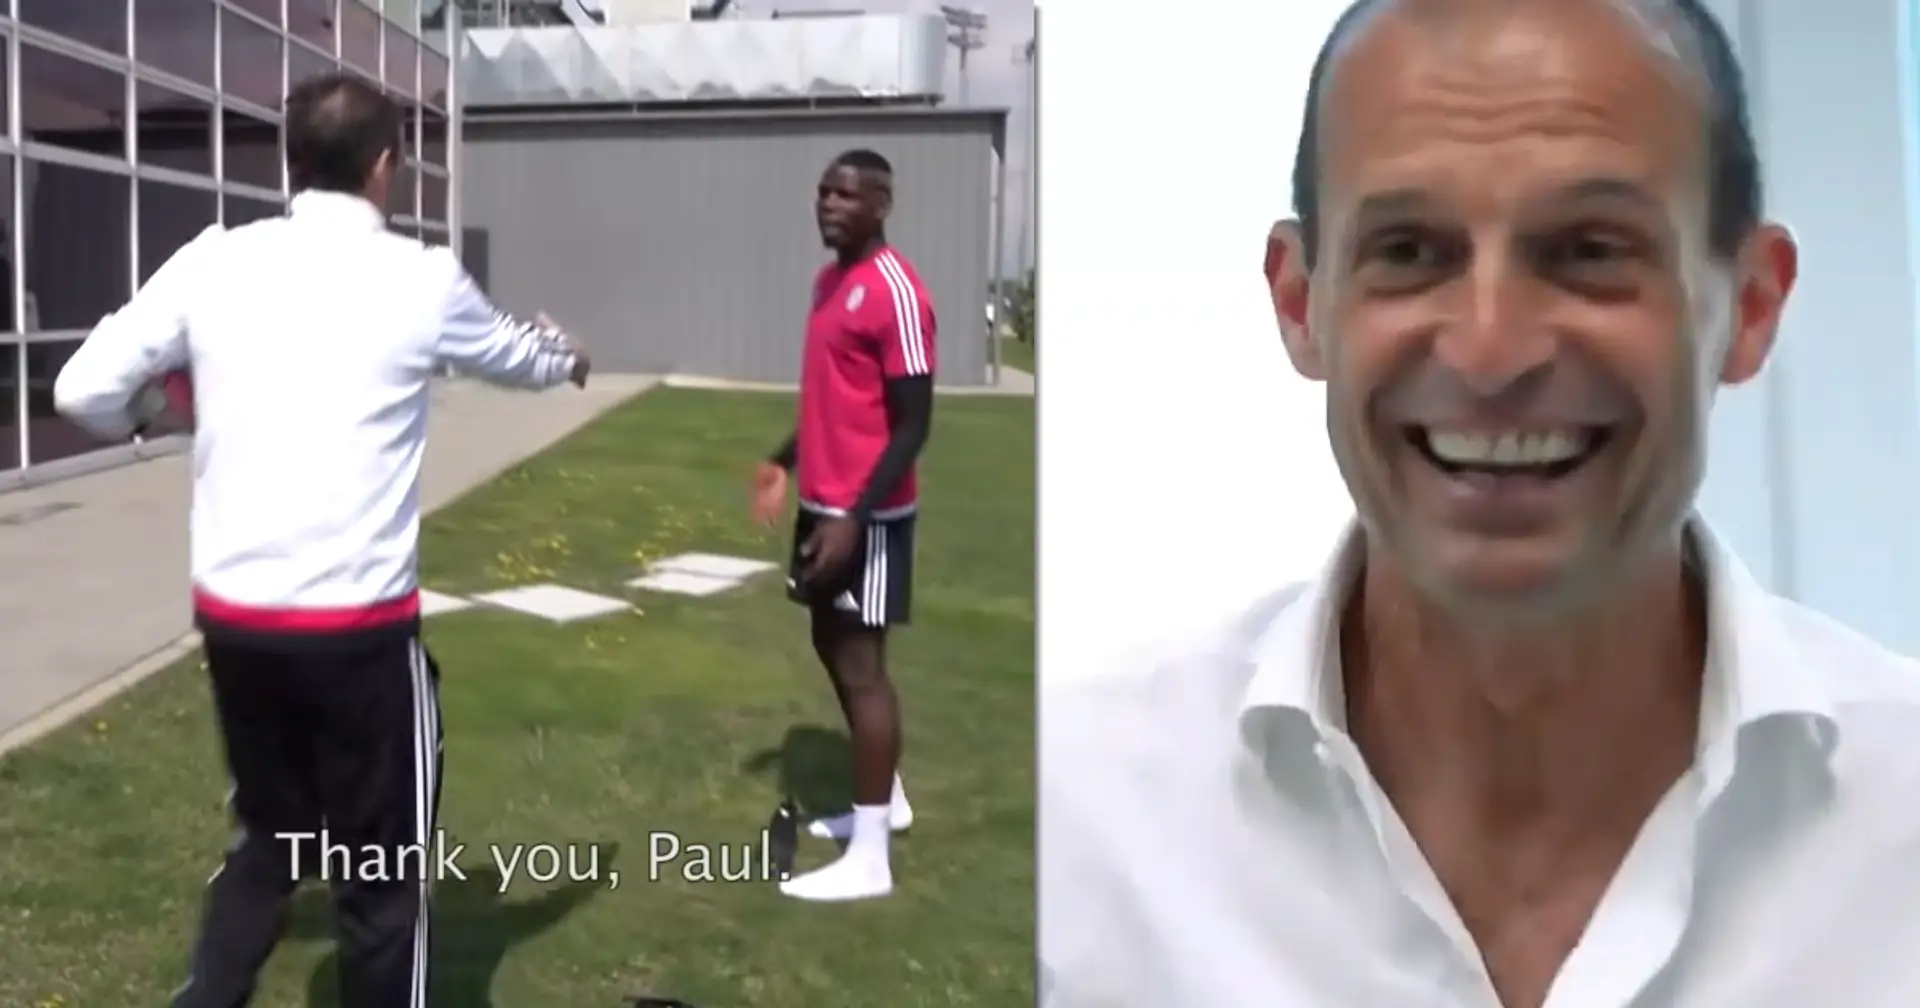 Allegri on Pogba: 'He won’t be back at Juventus. He lost to me in basketball. That’s the real reason why he left'